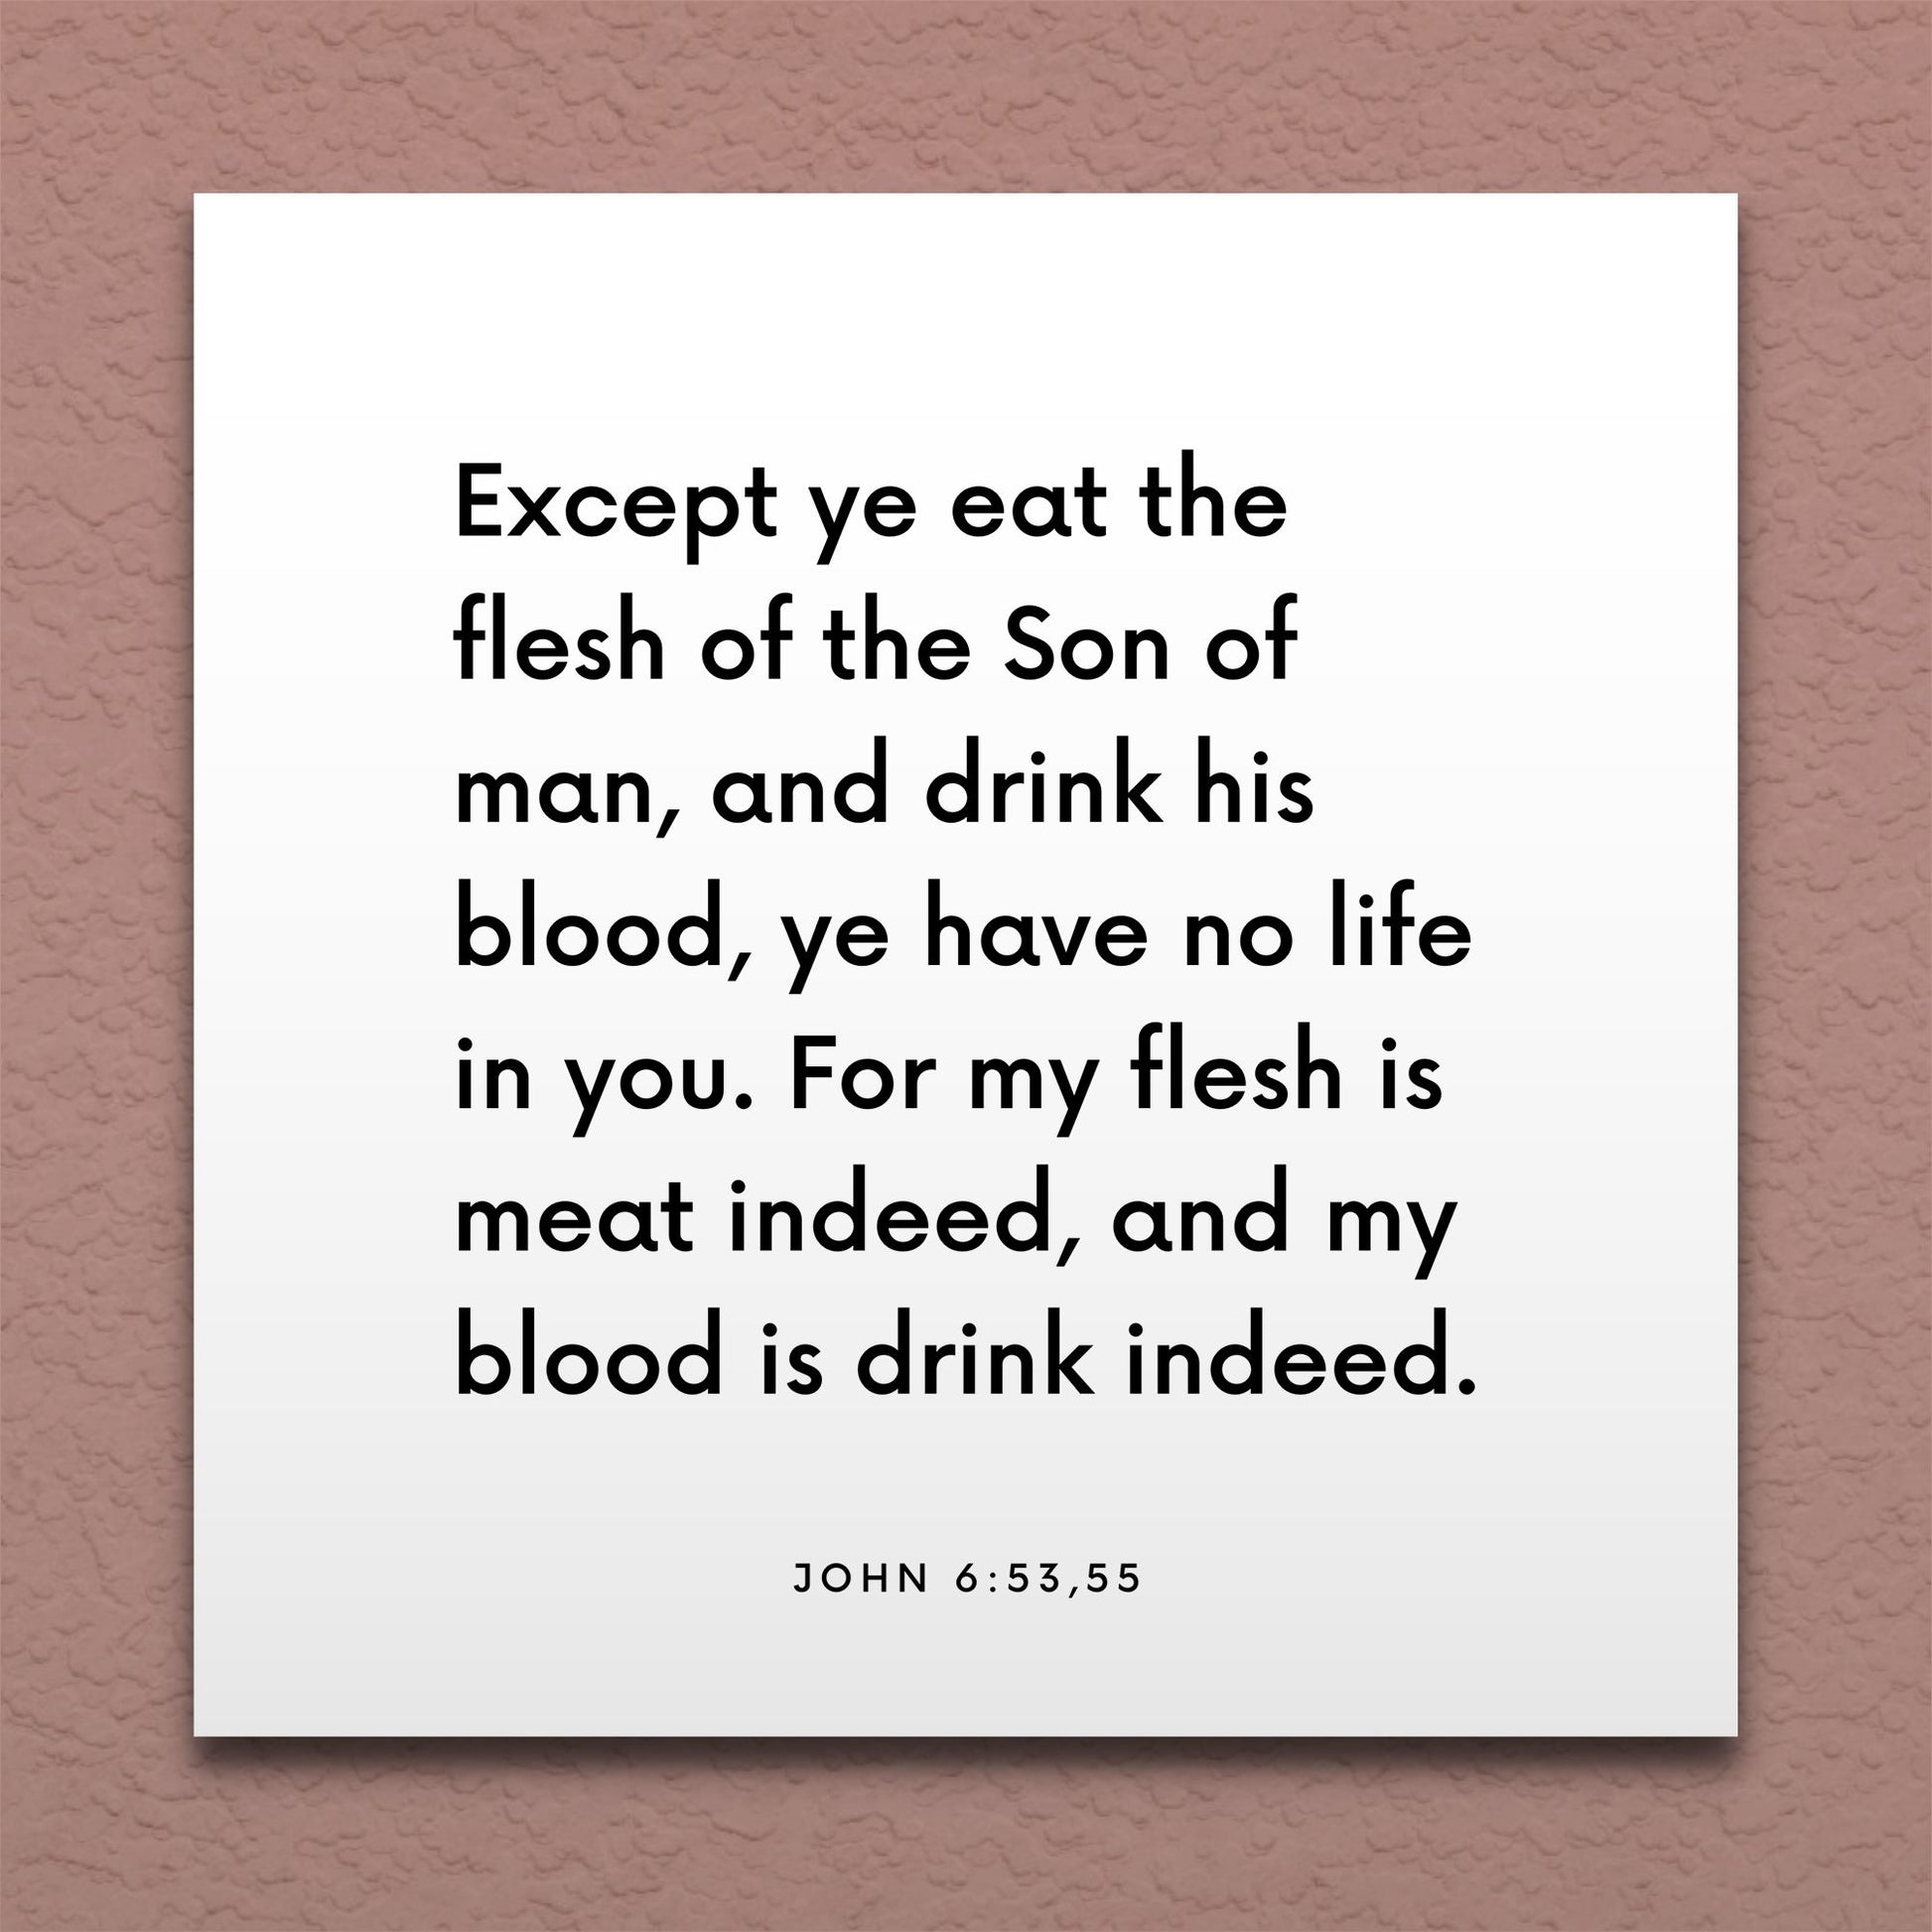 Wall-mounted scripture tile for John 6:53,55 - "My flesh is meat indeed, and my blood is drink indeed"